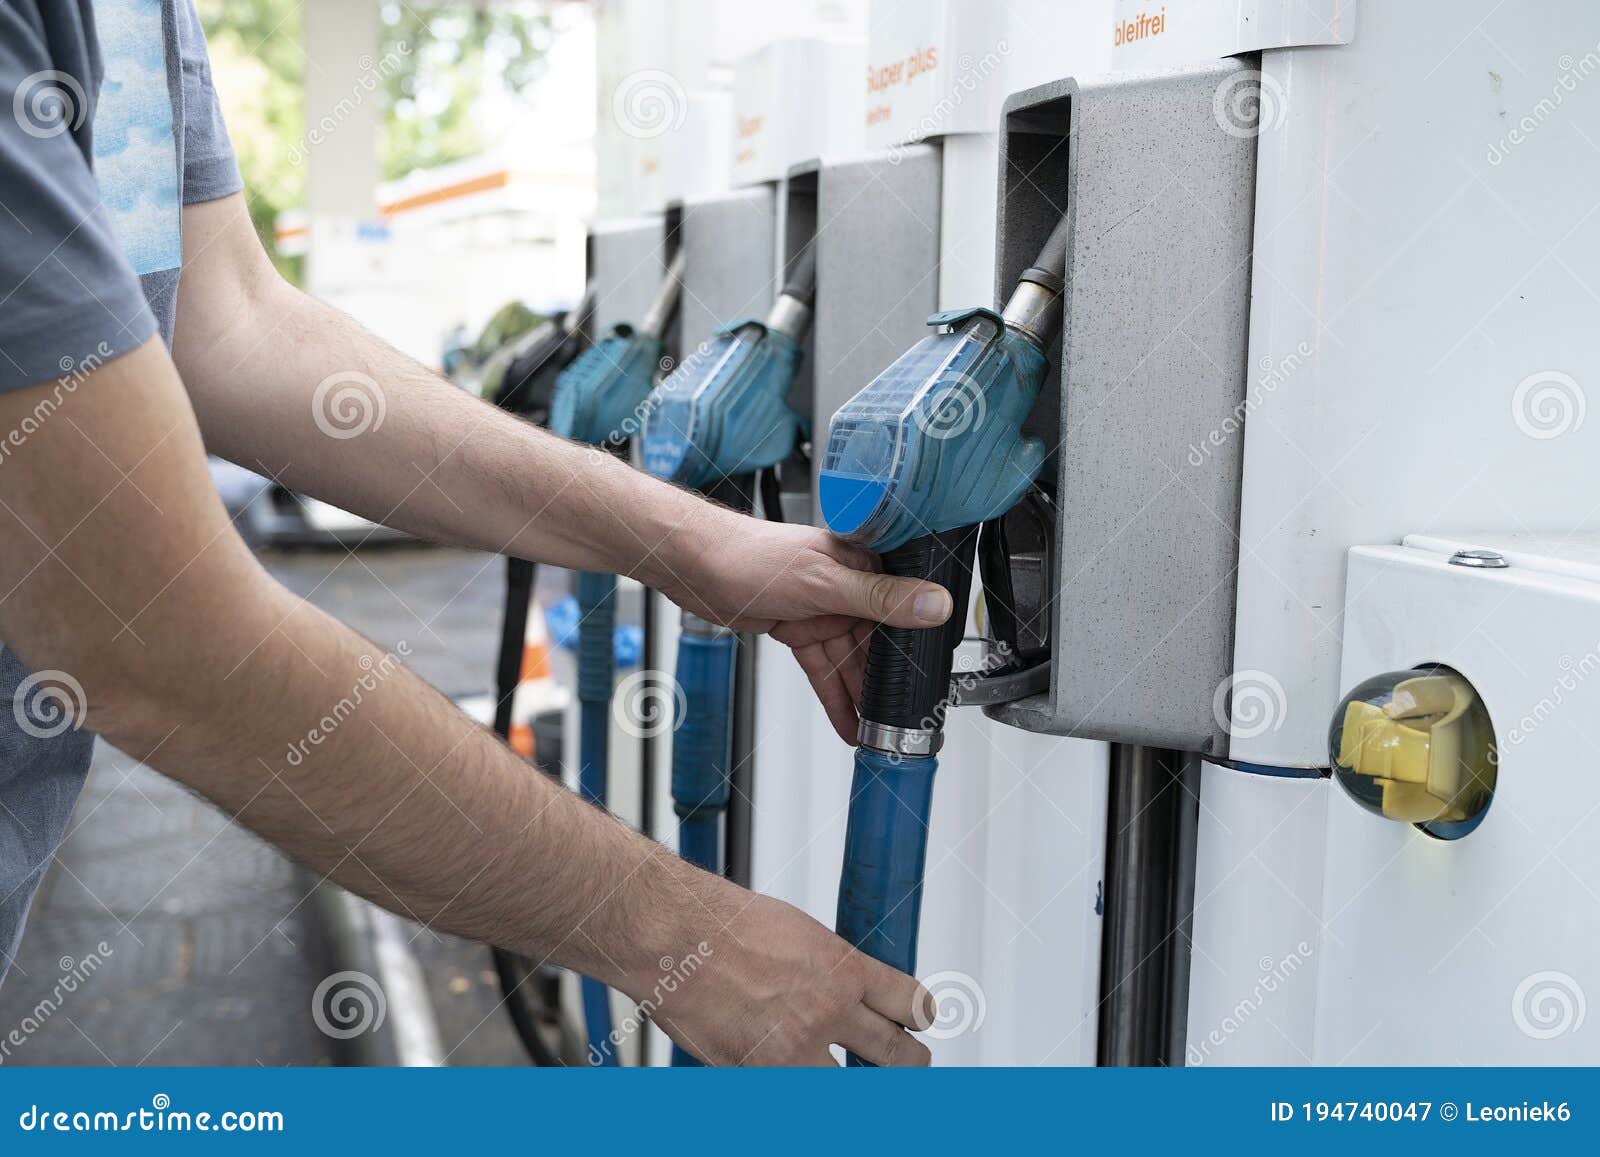 male hand places gaspump nozzle back in the pump at the gasstation